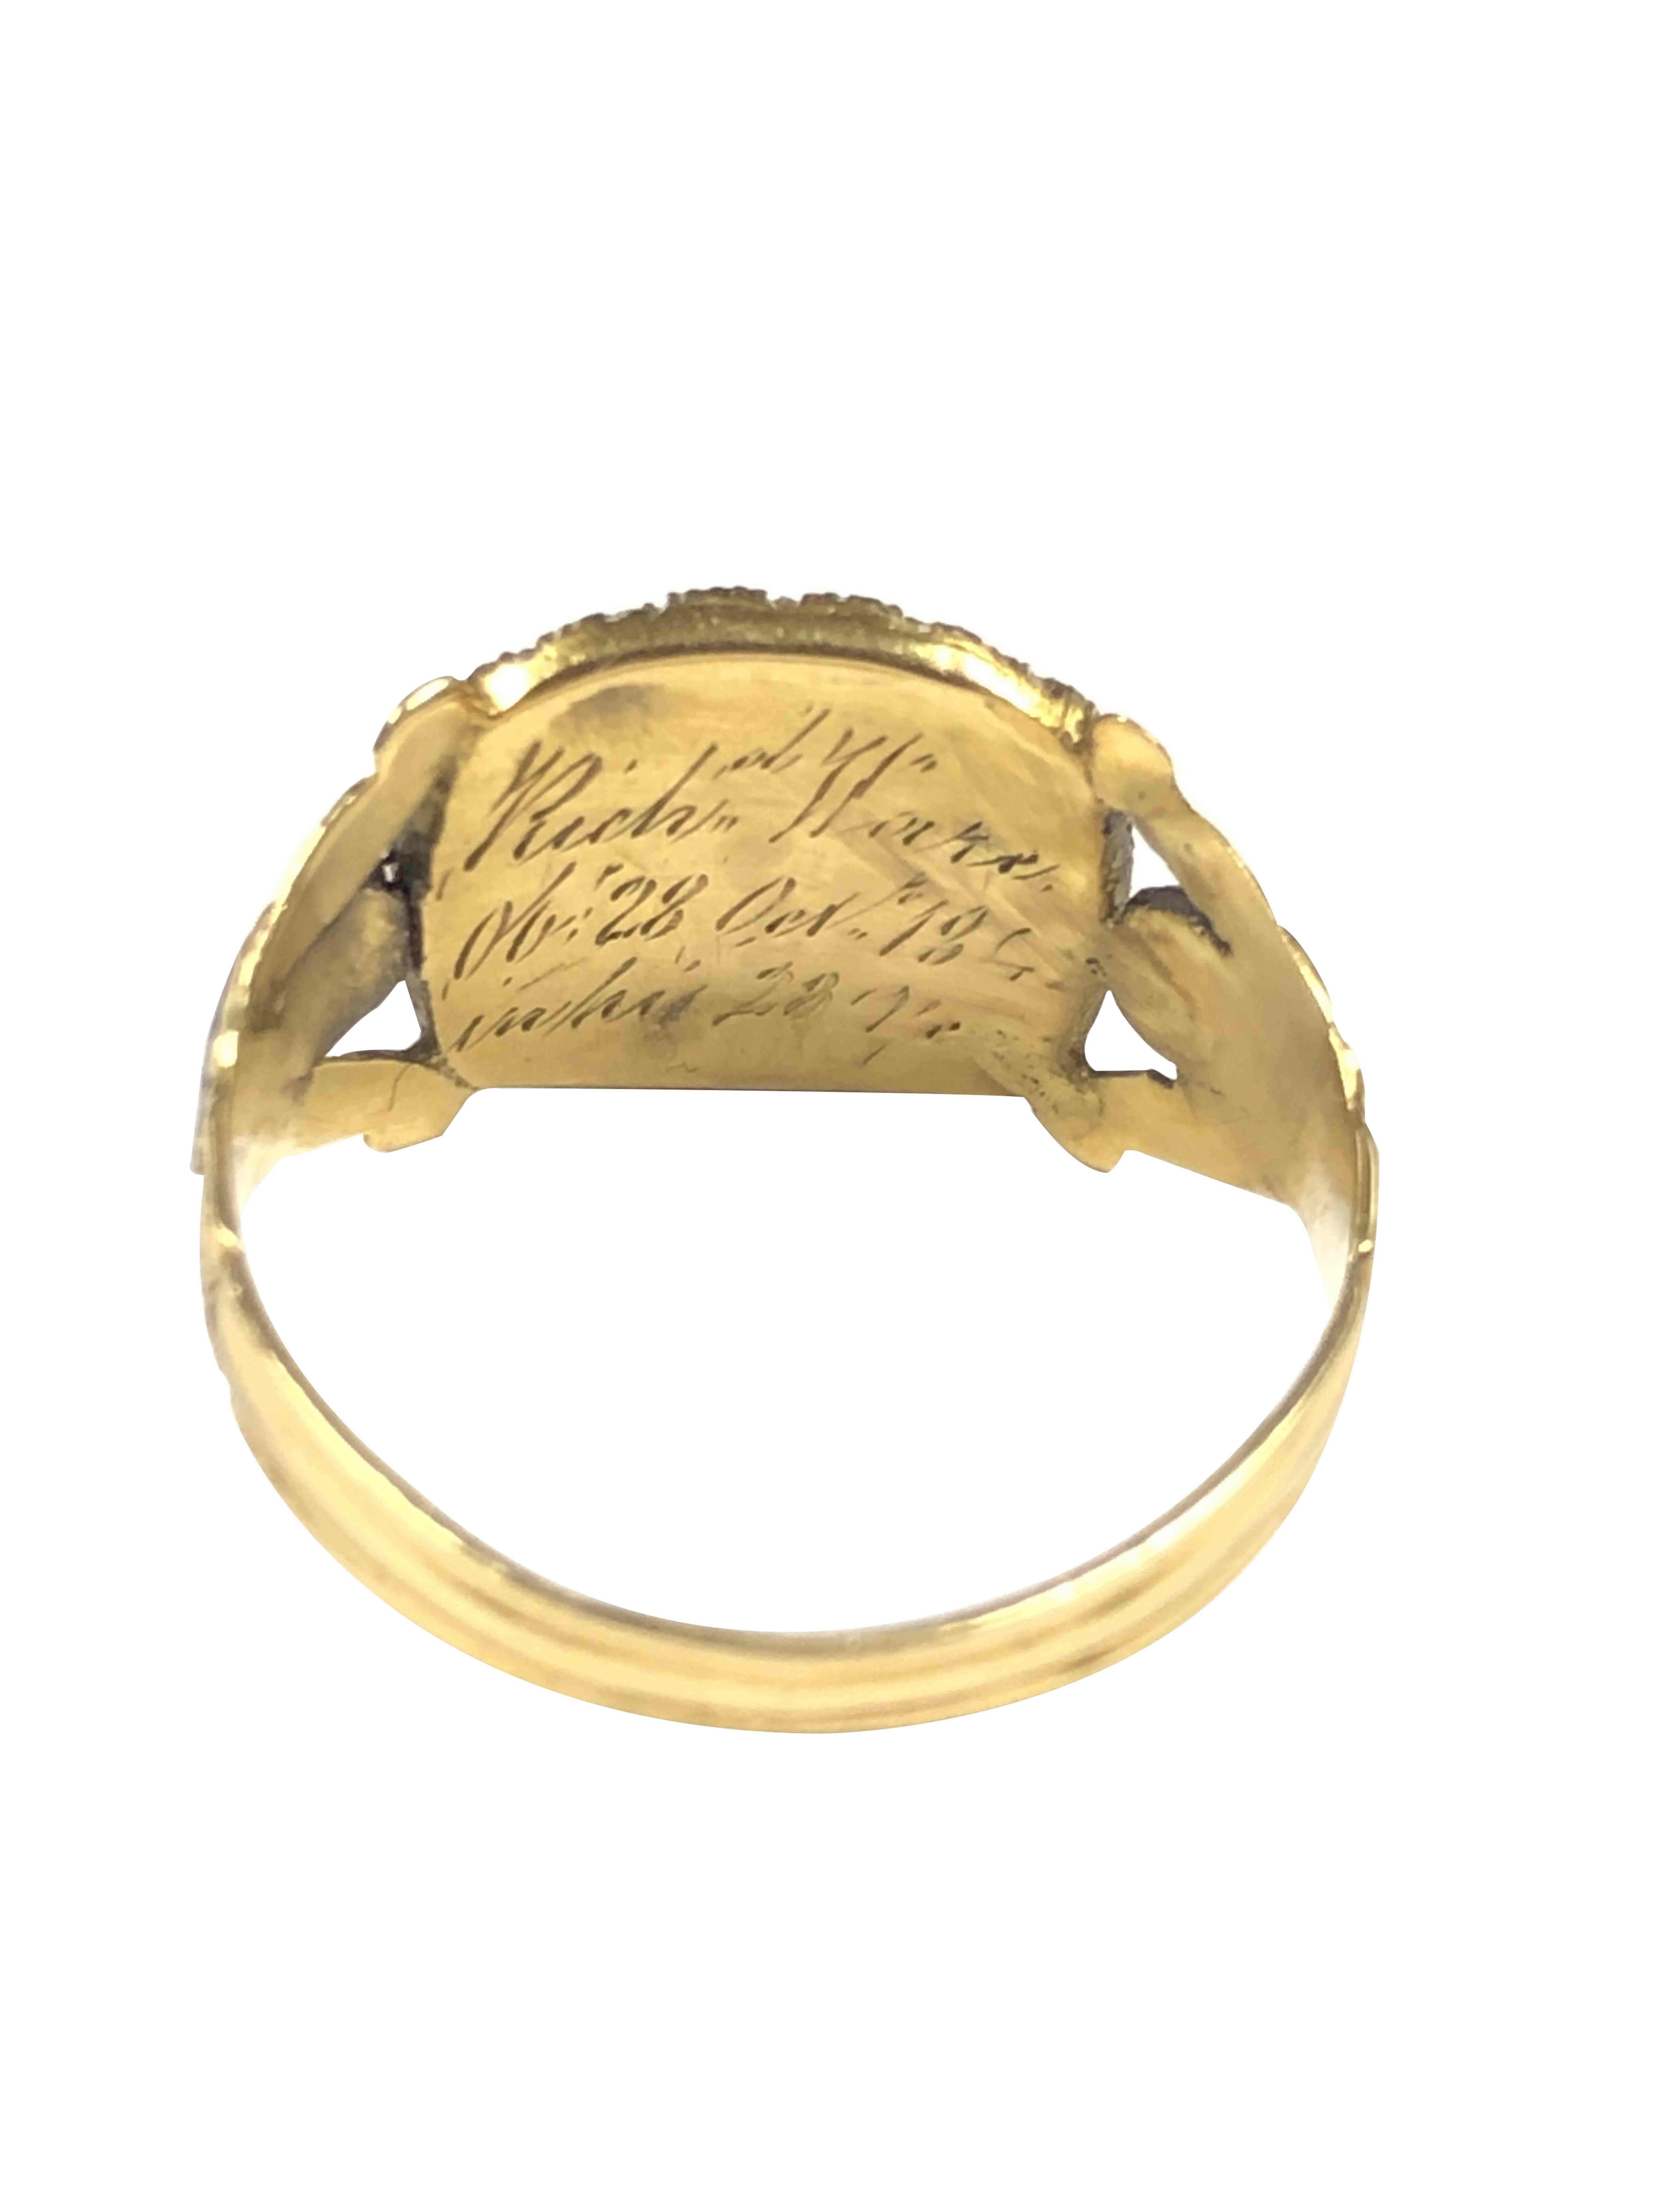 Circa 1840s 18K yellow Gold Memorial Memento Ring, the top of the ring measures 1/2 X 3/8 inch and is centrally set with a Garnet that is surrounded by Rose cut Diamonds, further decorated in Black enamel and having hand Chasing work on the shank.